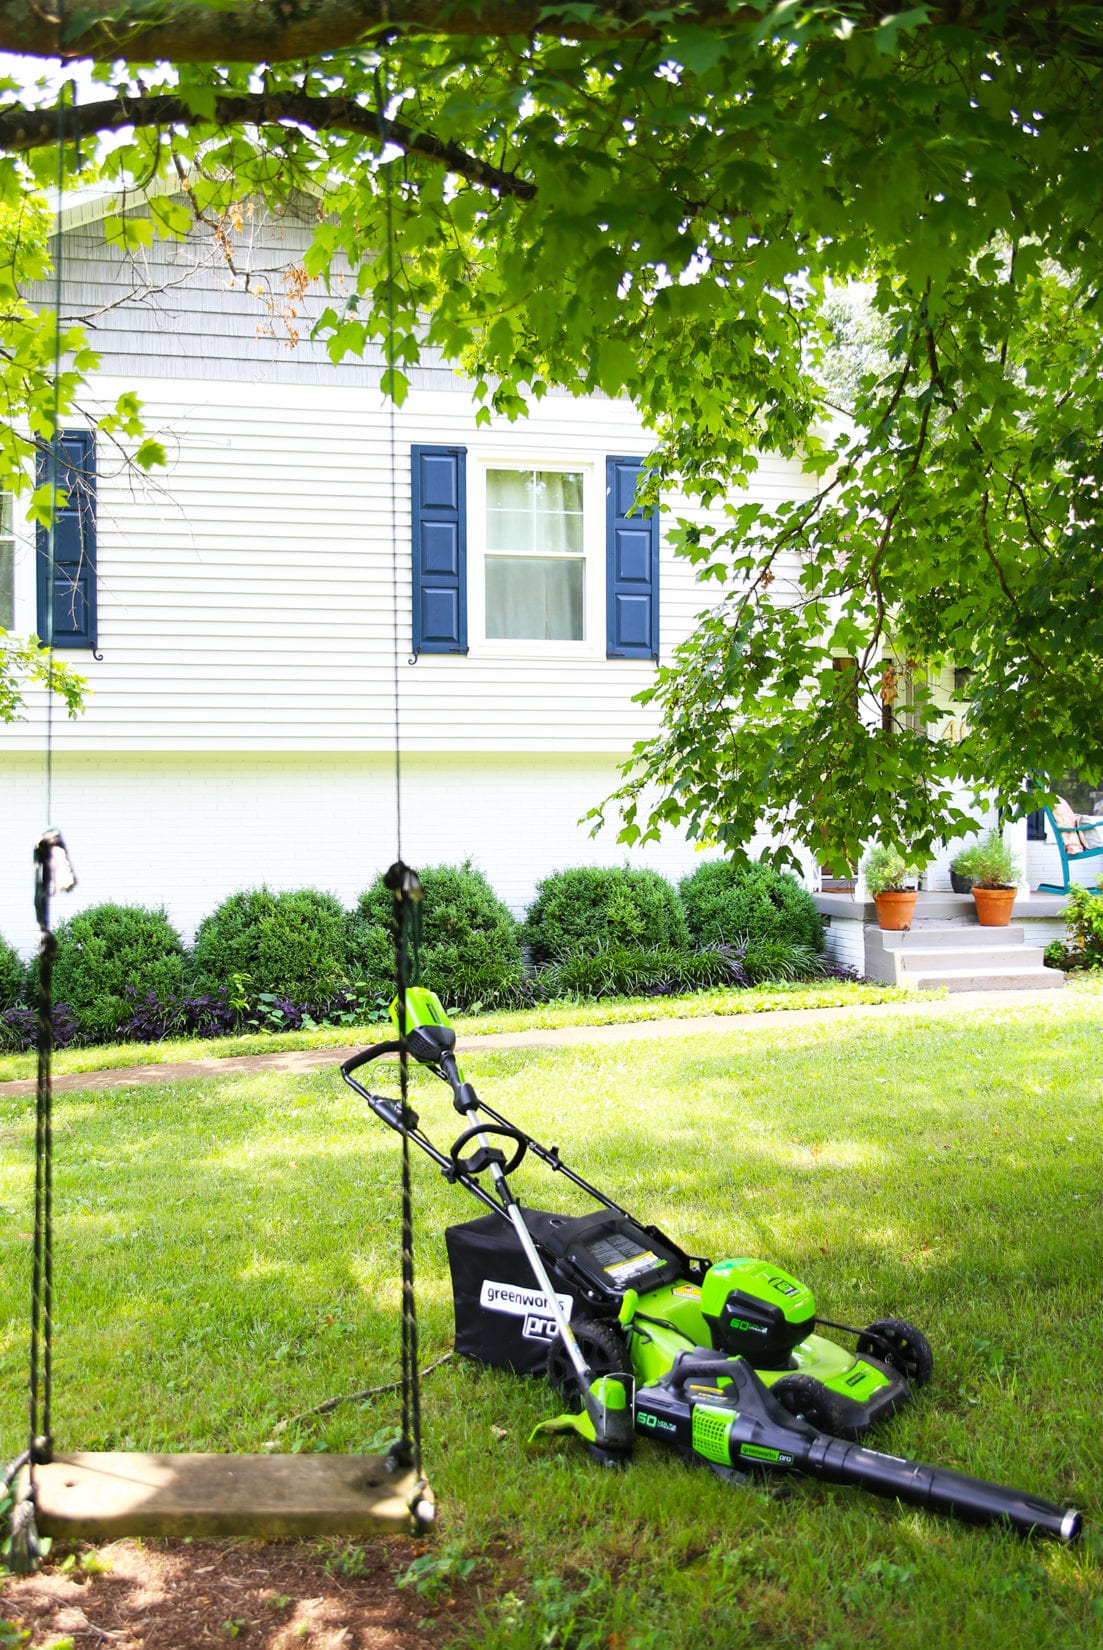 Is battery powered lawn equipment better?